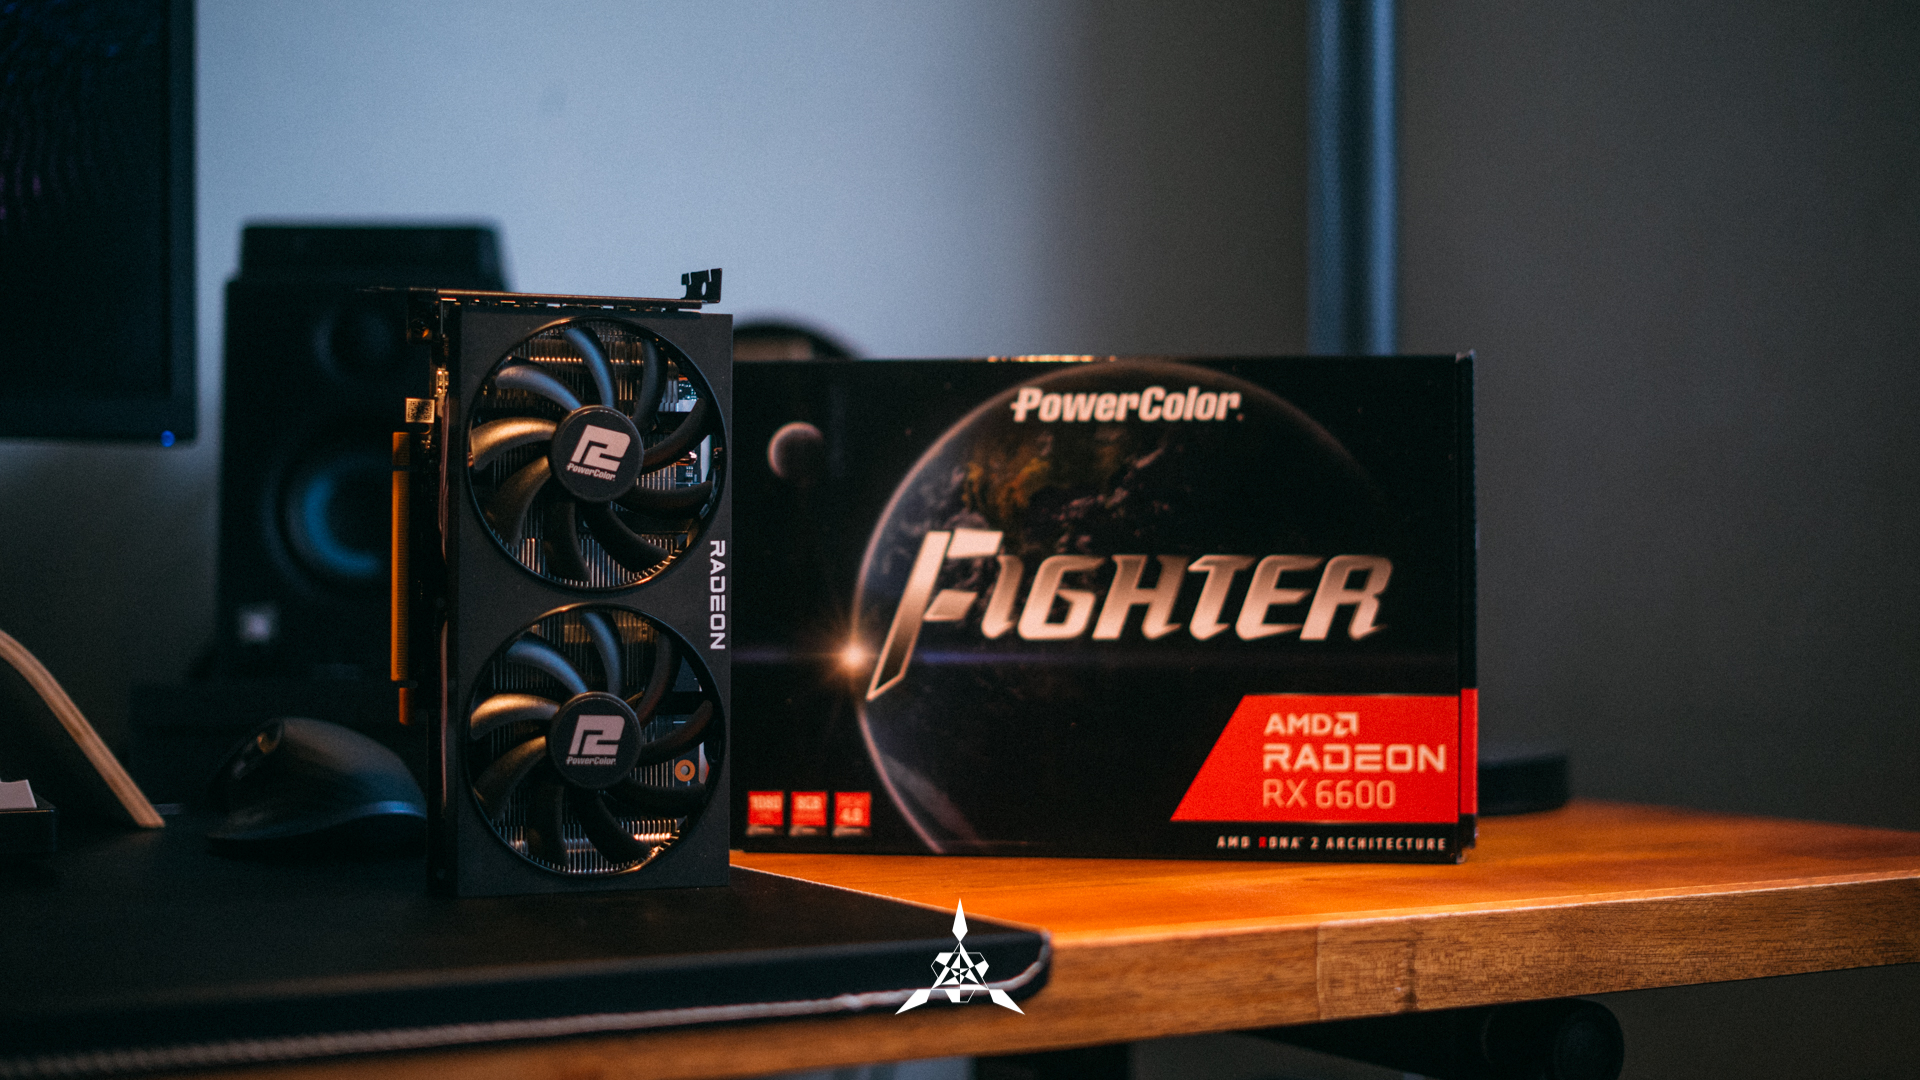 Powercolor Fighter AMD Radeon RX 6600 Review: 1080p Only Card | TAV